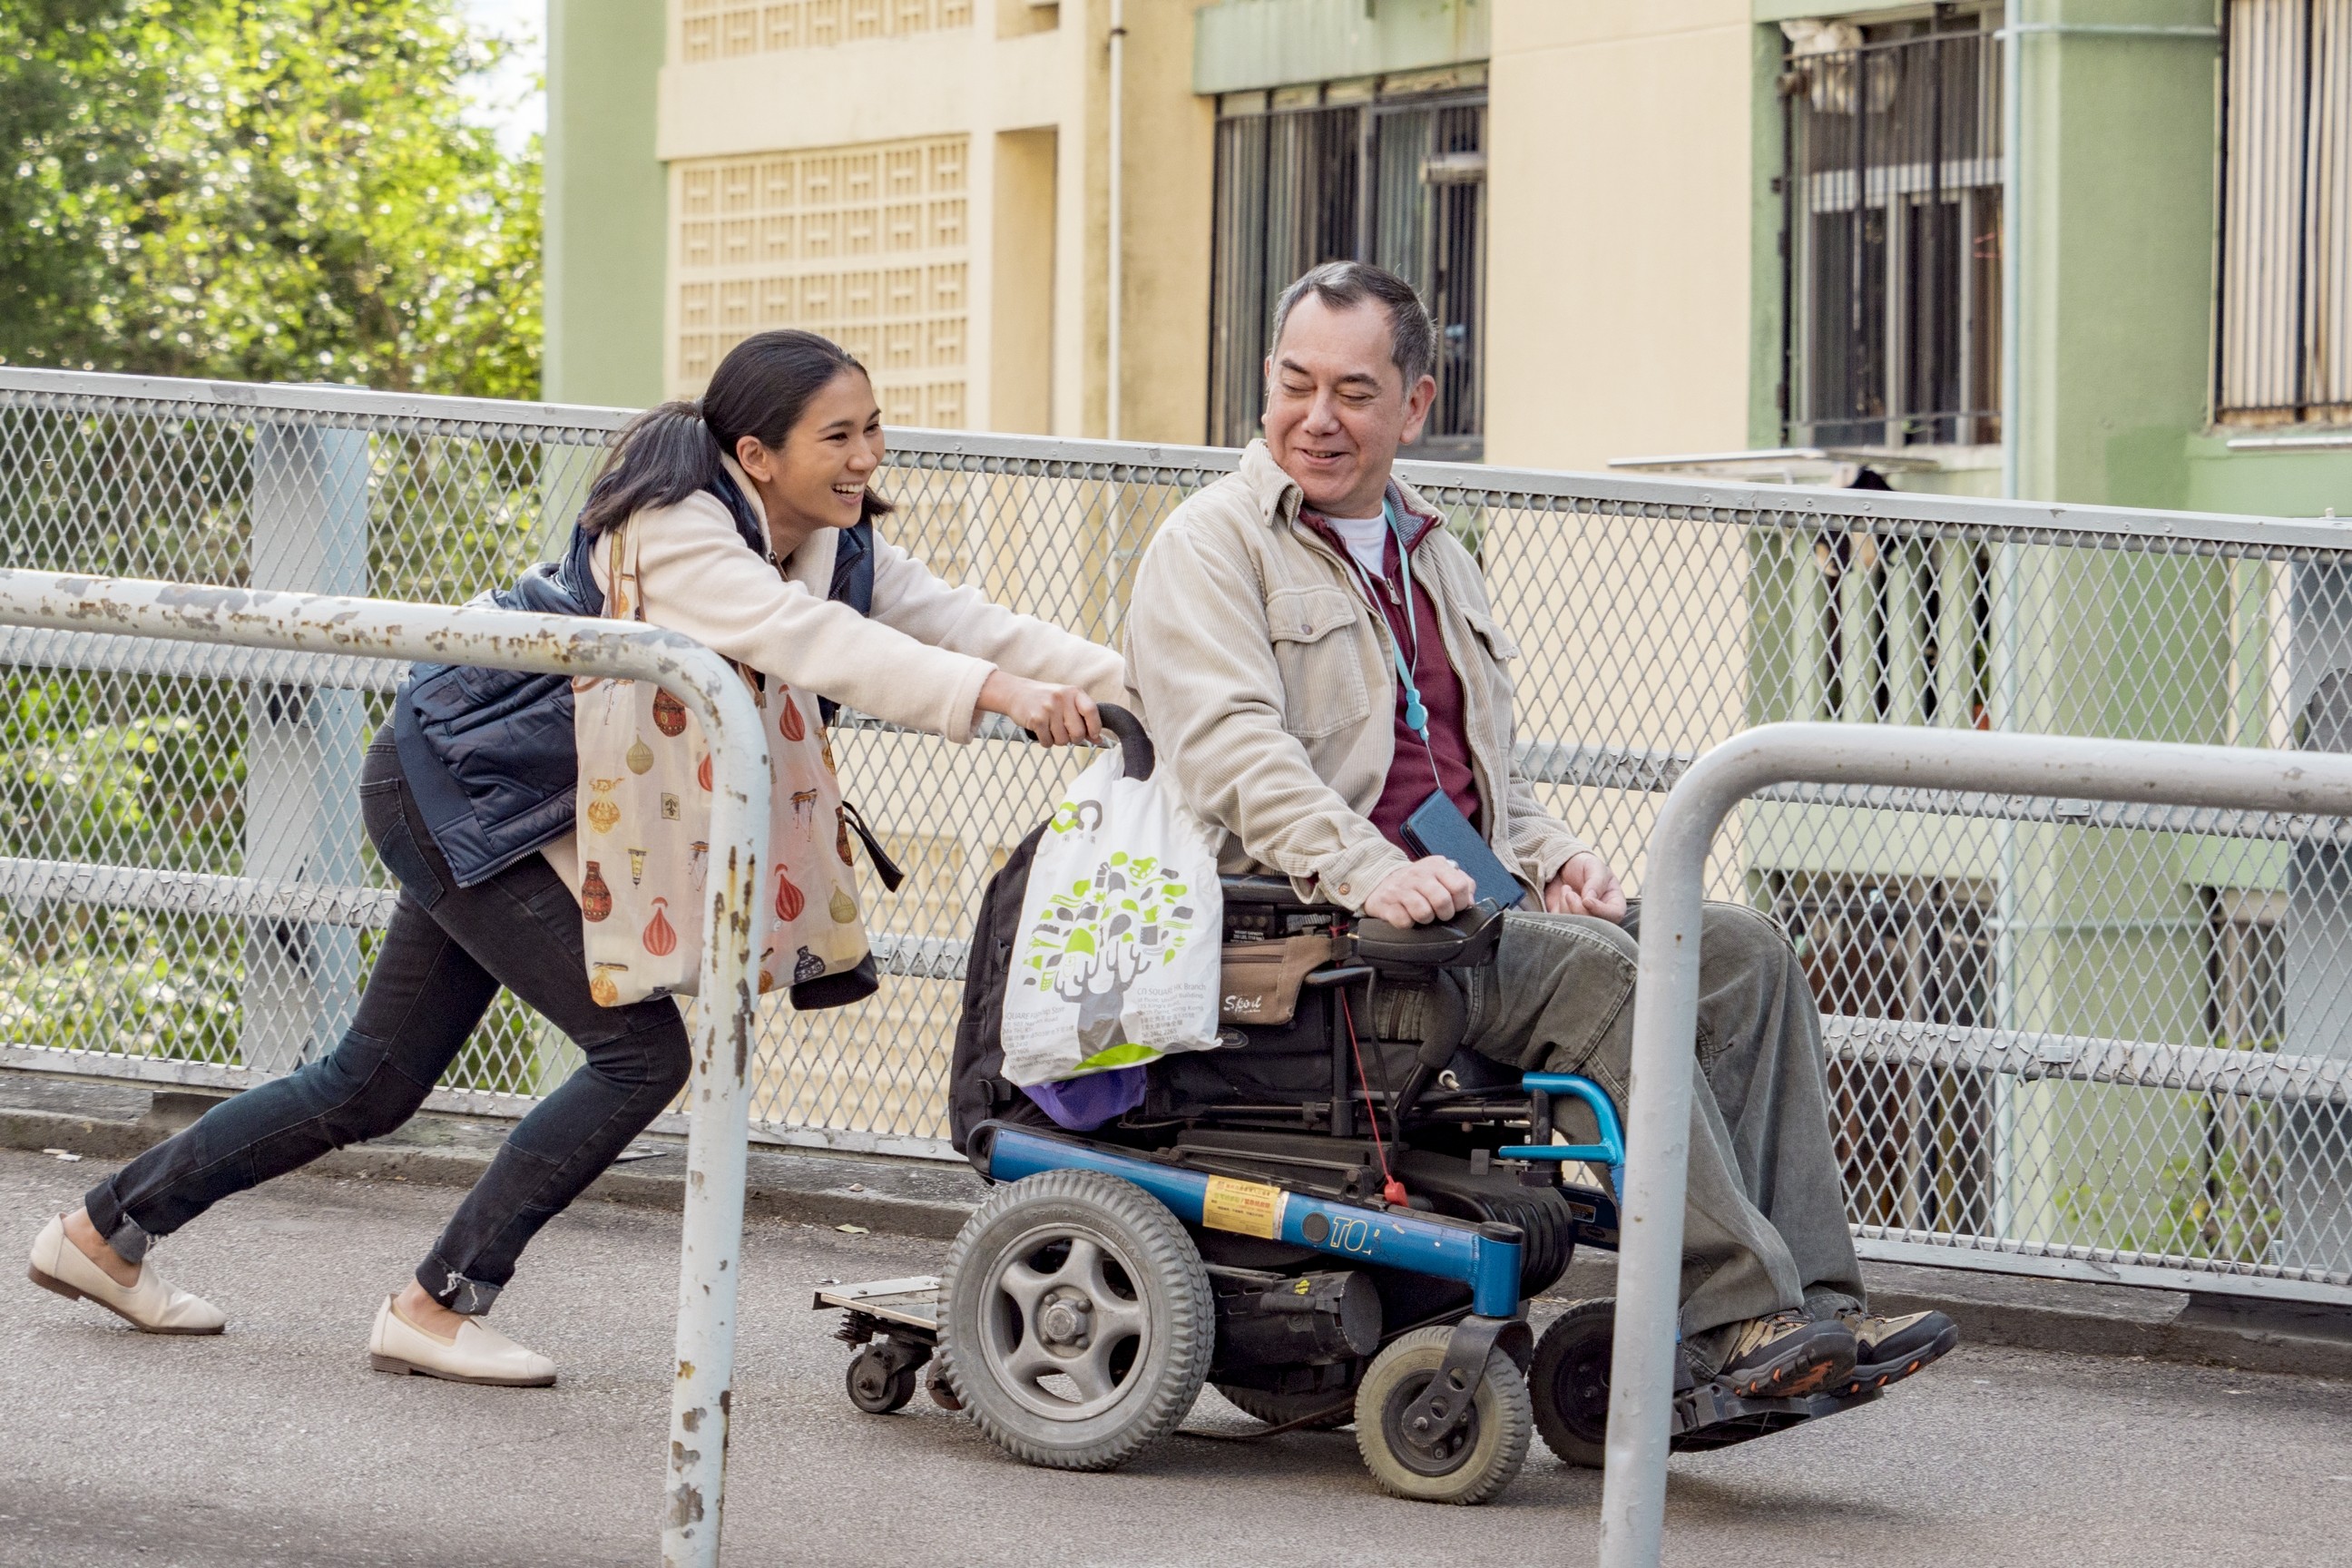 Crisel Consunji (left) and Anthony Wong in a still from “Still Human”.